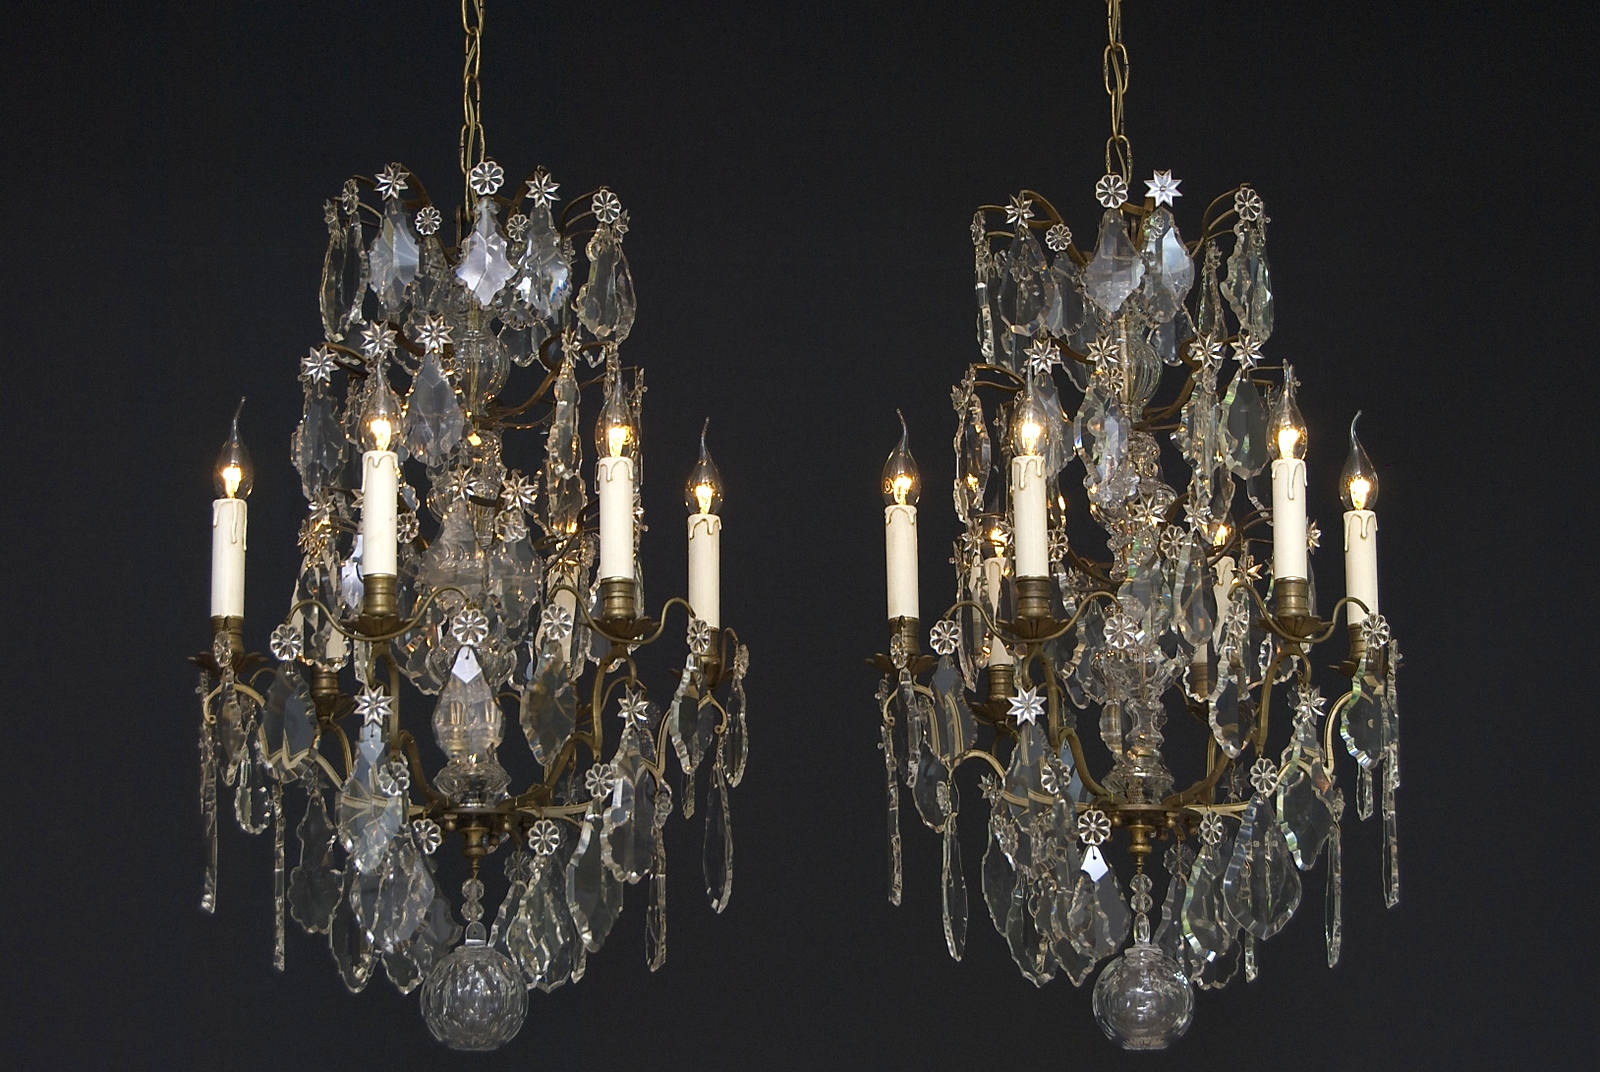 A unique pair of 2 identical French crystal chandeliers